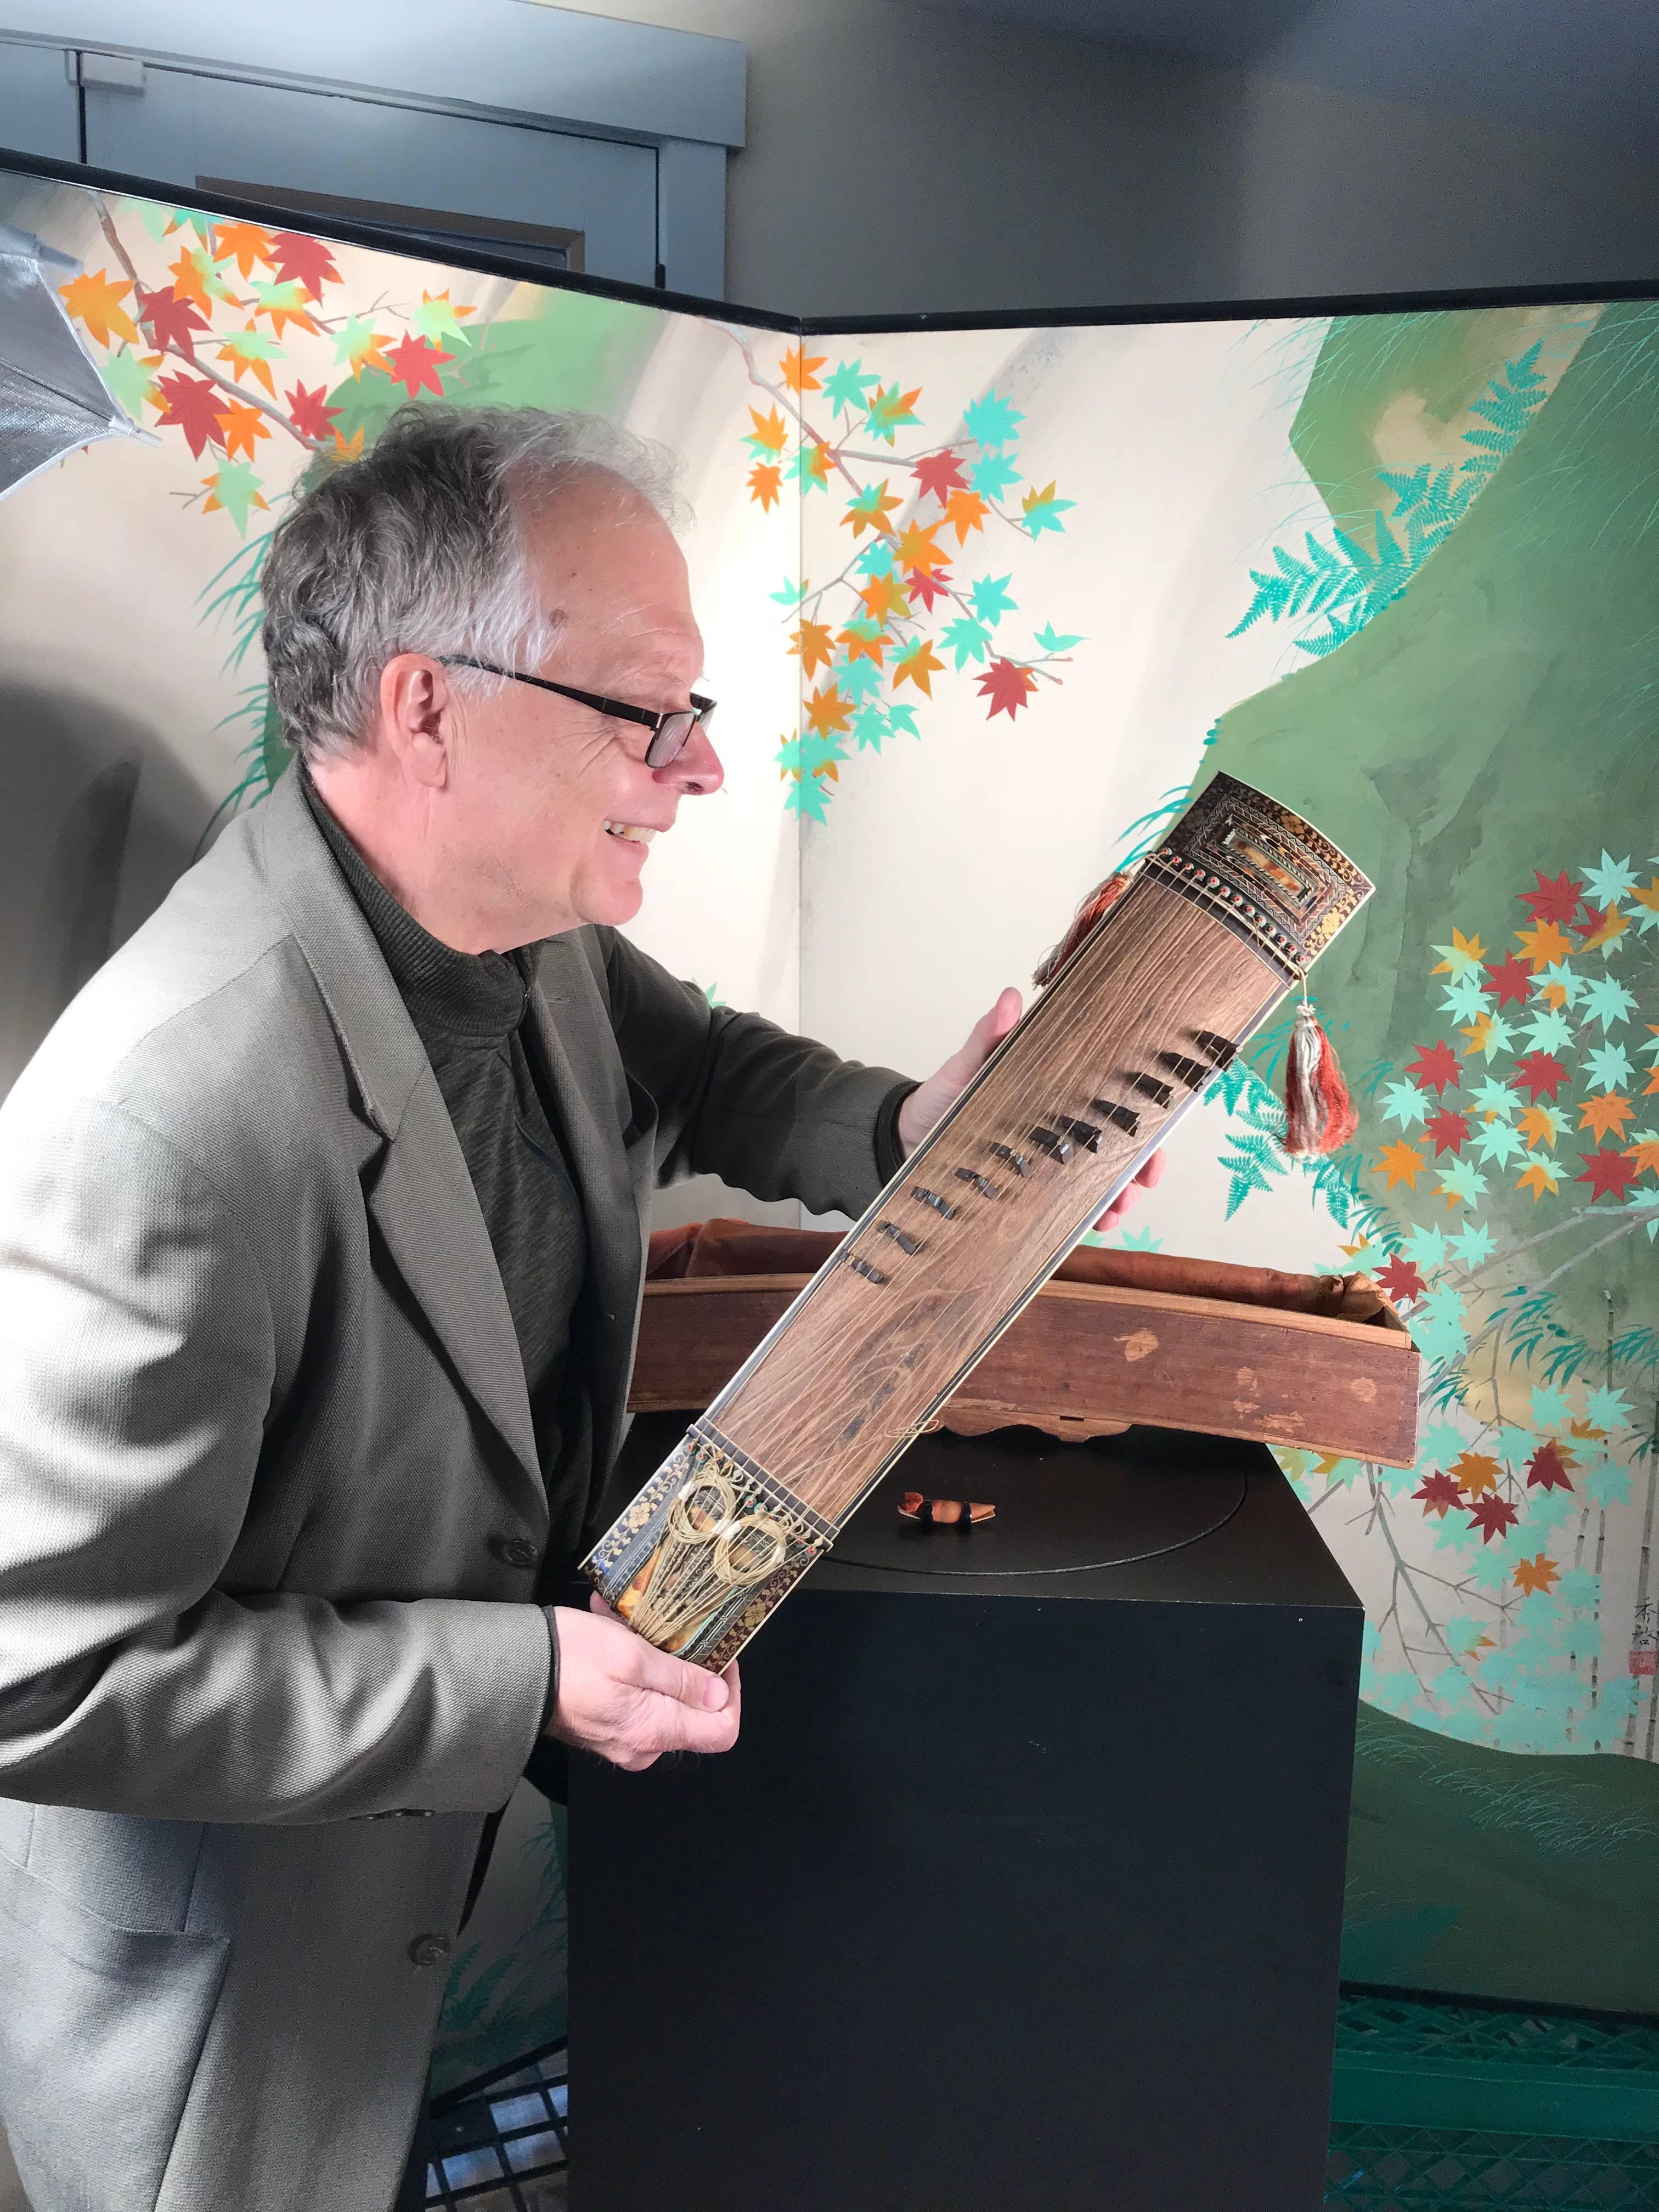 From our recent Japanese acquisitions trip.

Japan fine antique lacquered Maki-e Koto Lute stringed instrument, in a rare violin size, Meiji period 19th century. Includes original wooden storage box and yellow protective cloth. Immediately